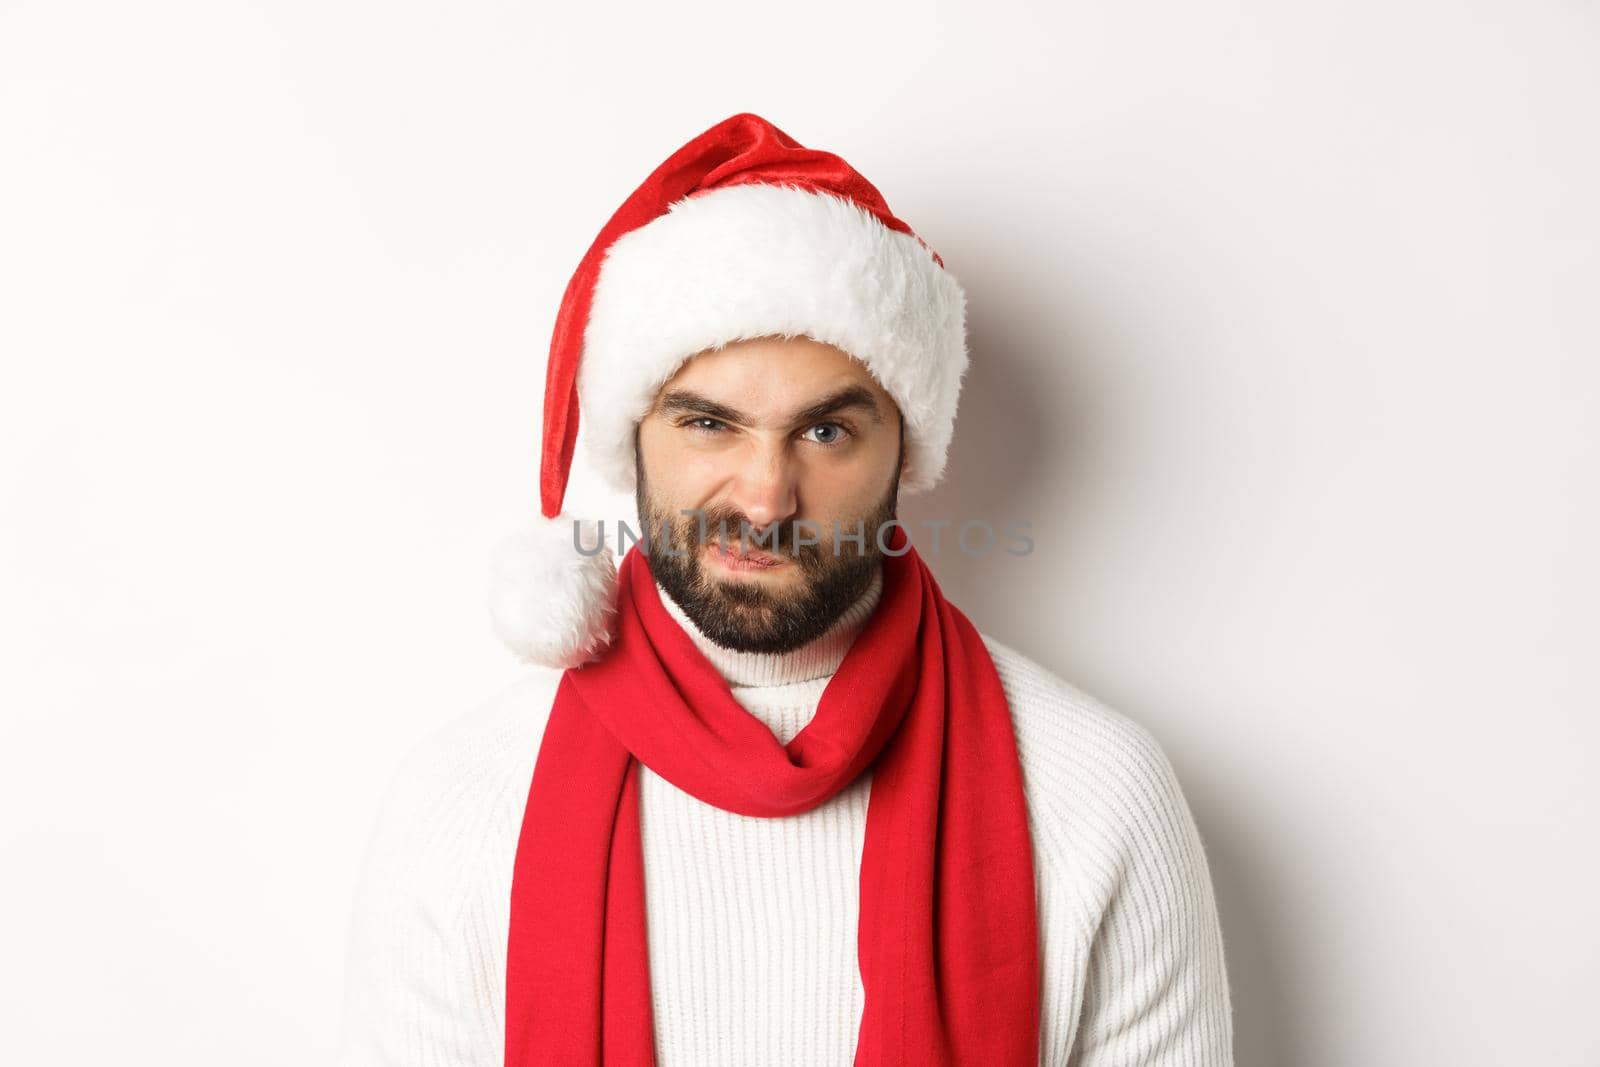 New Year party and winter holidays concept. Close-up of grumpy guy in santa hat frowning and grimacing, standing against white background.